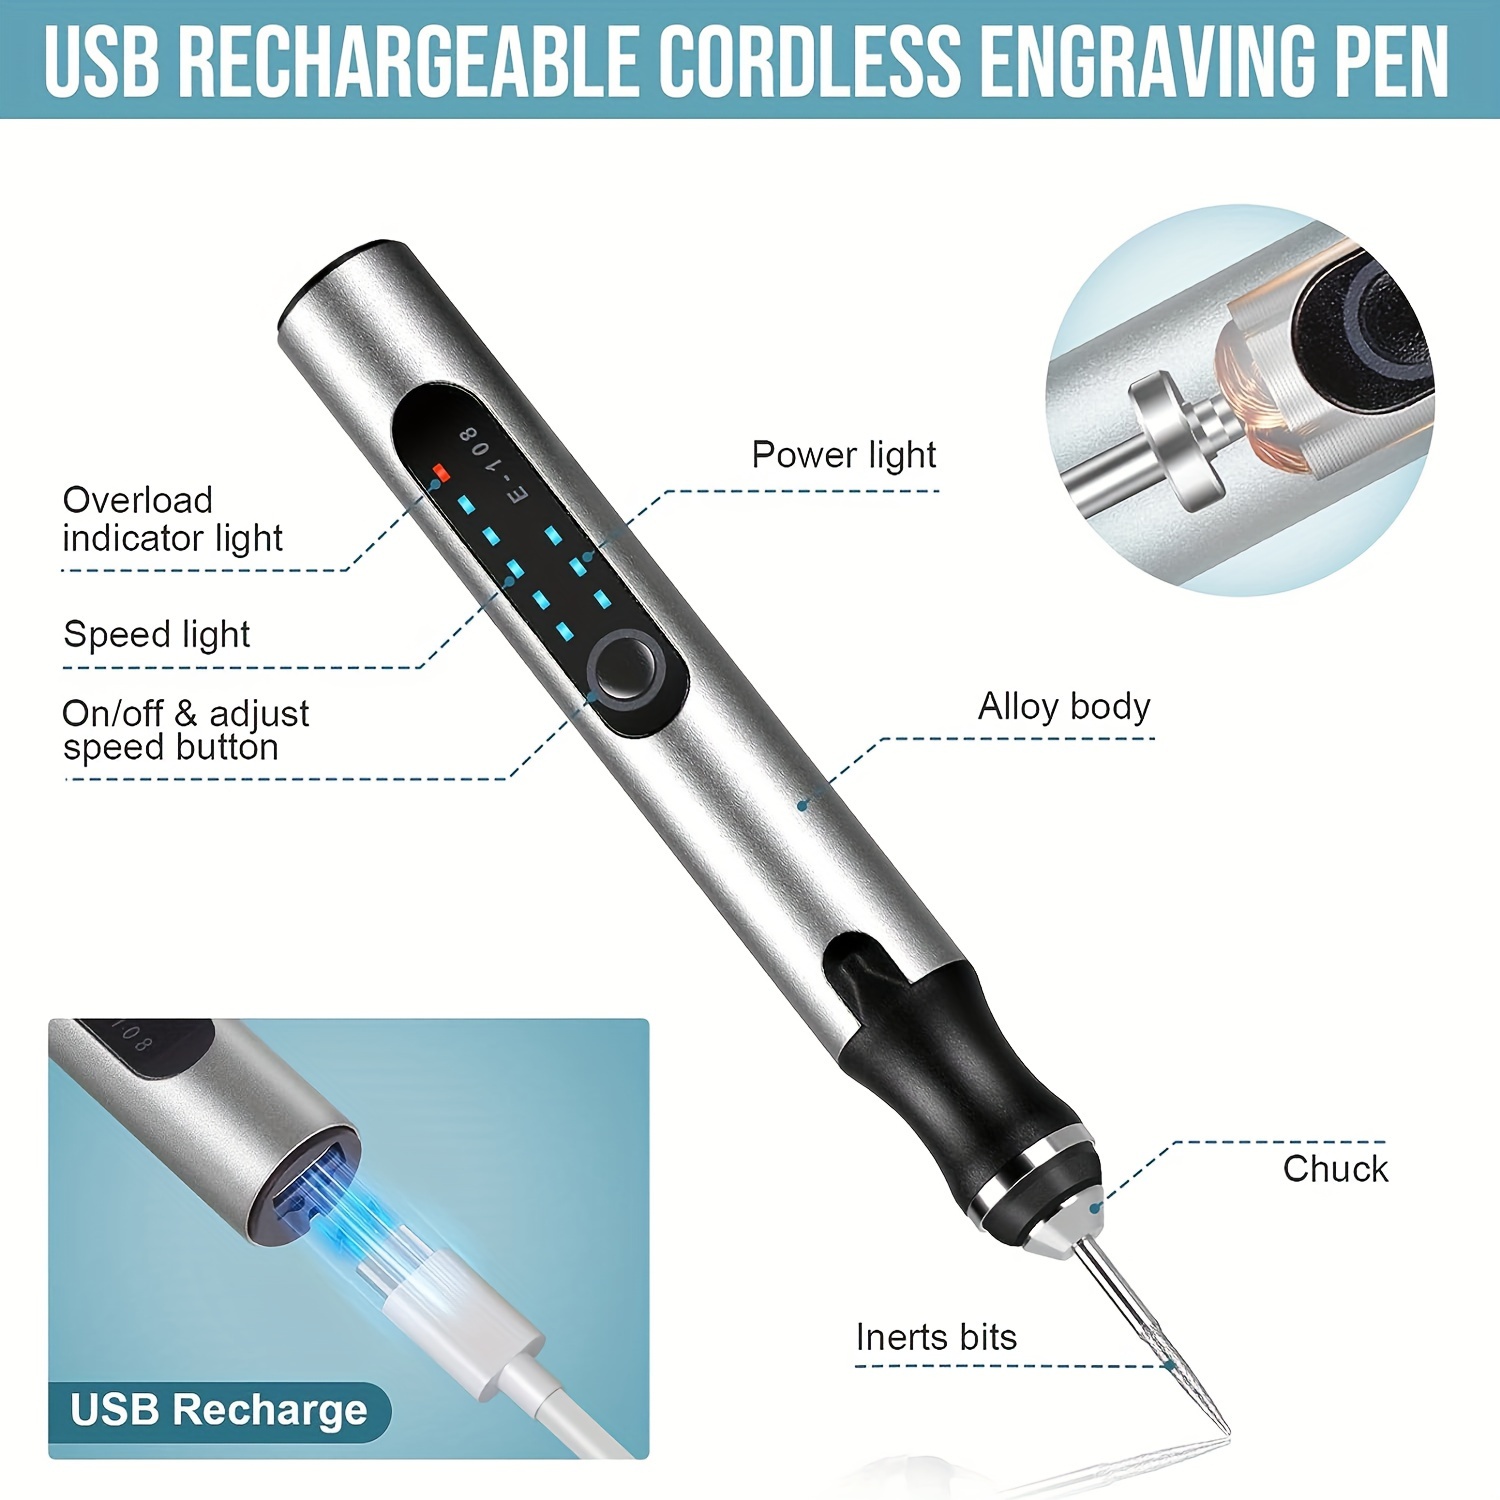 Uolor Cordless Usb Rechargeable Engraving Tool Kit, Mini Electric